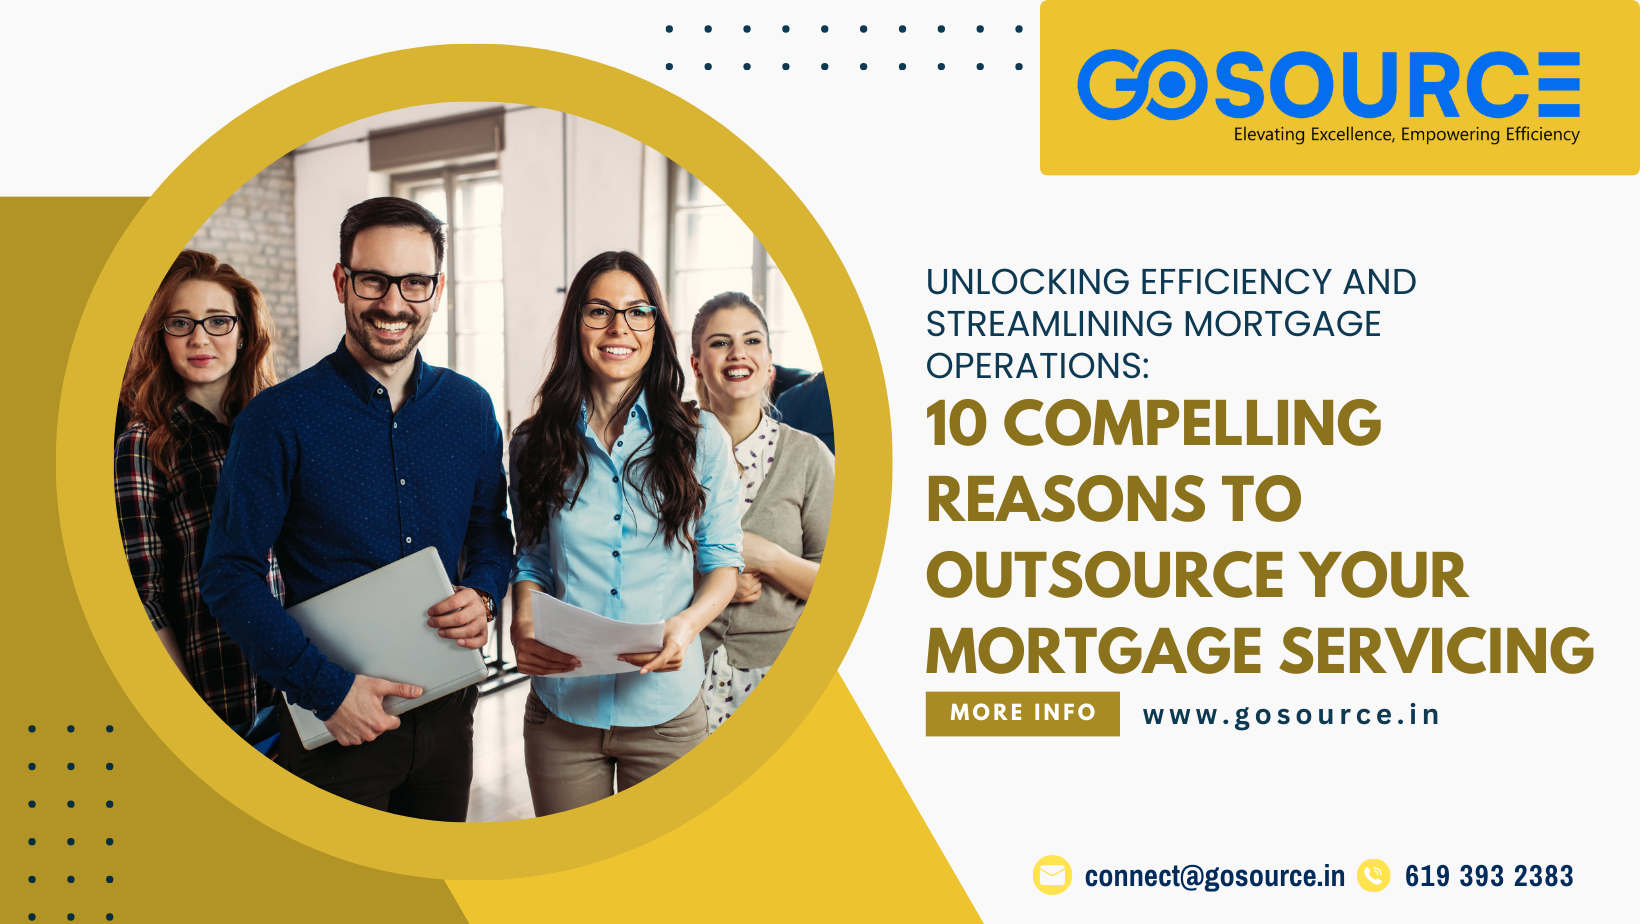 Unlocking Efficiency and Streamlining Mortgage Operations: 10 Compelling Reasons to Outsource Your Mortgage Servicing”